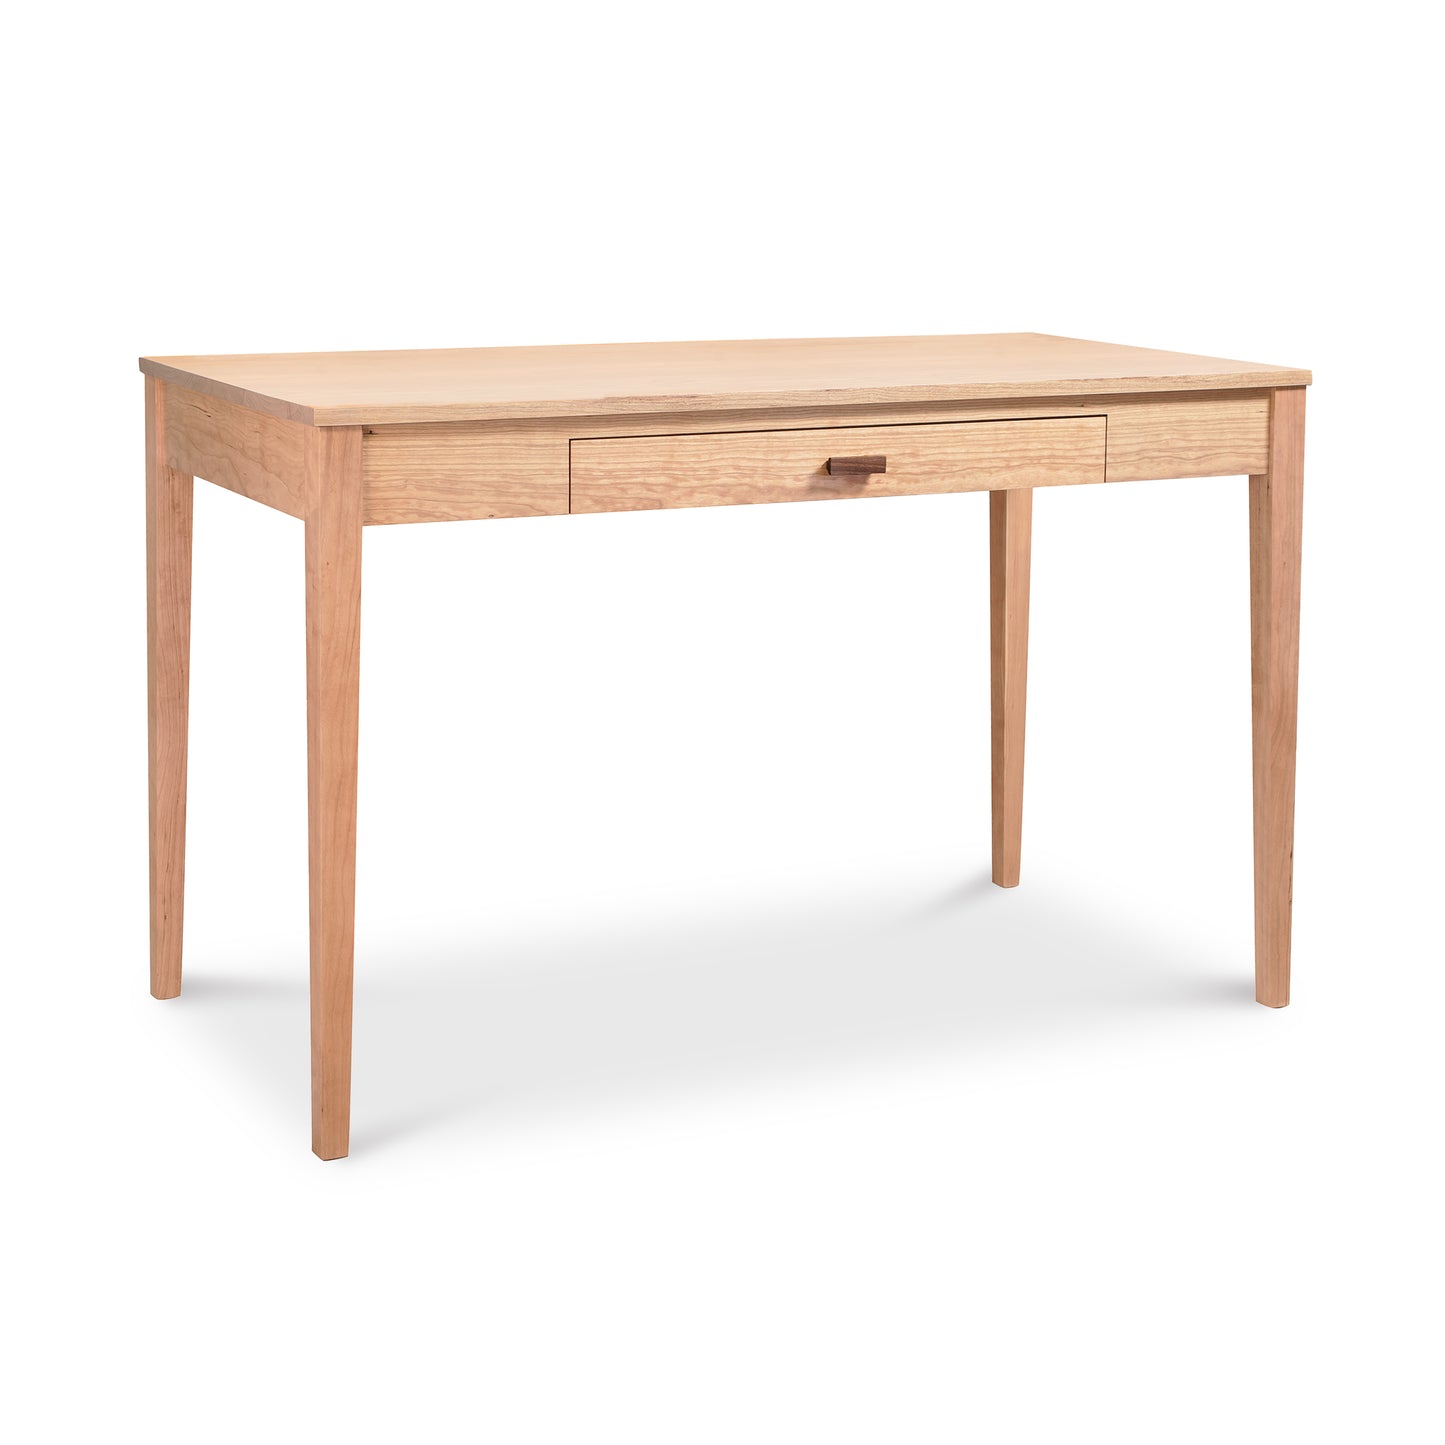 An image of a contemporary Maple Corner Woodworks Andover Modern Writing Desk, handcrafted with a wooden desk and a drawer.